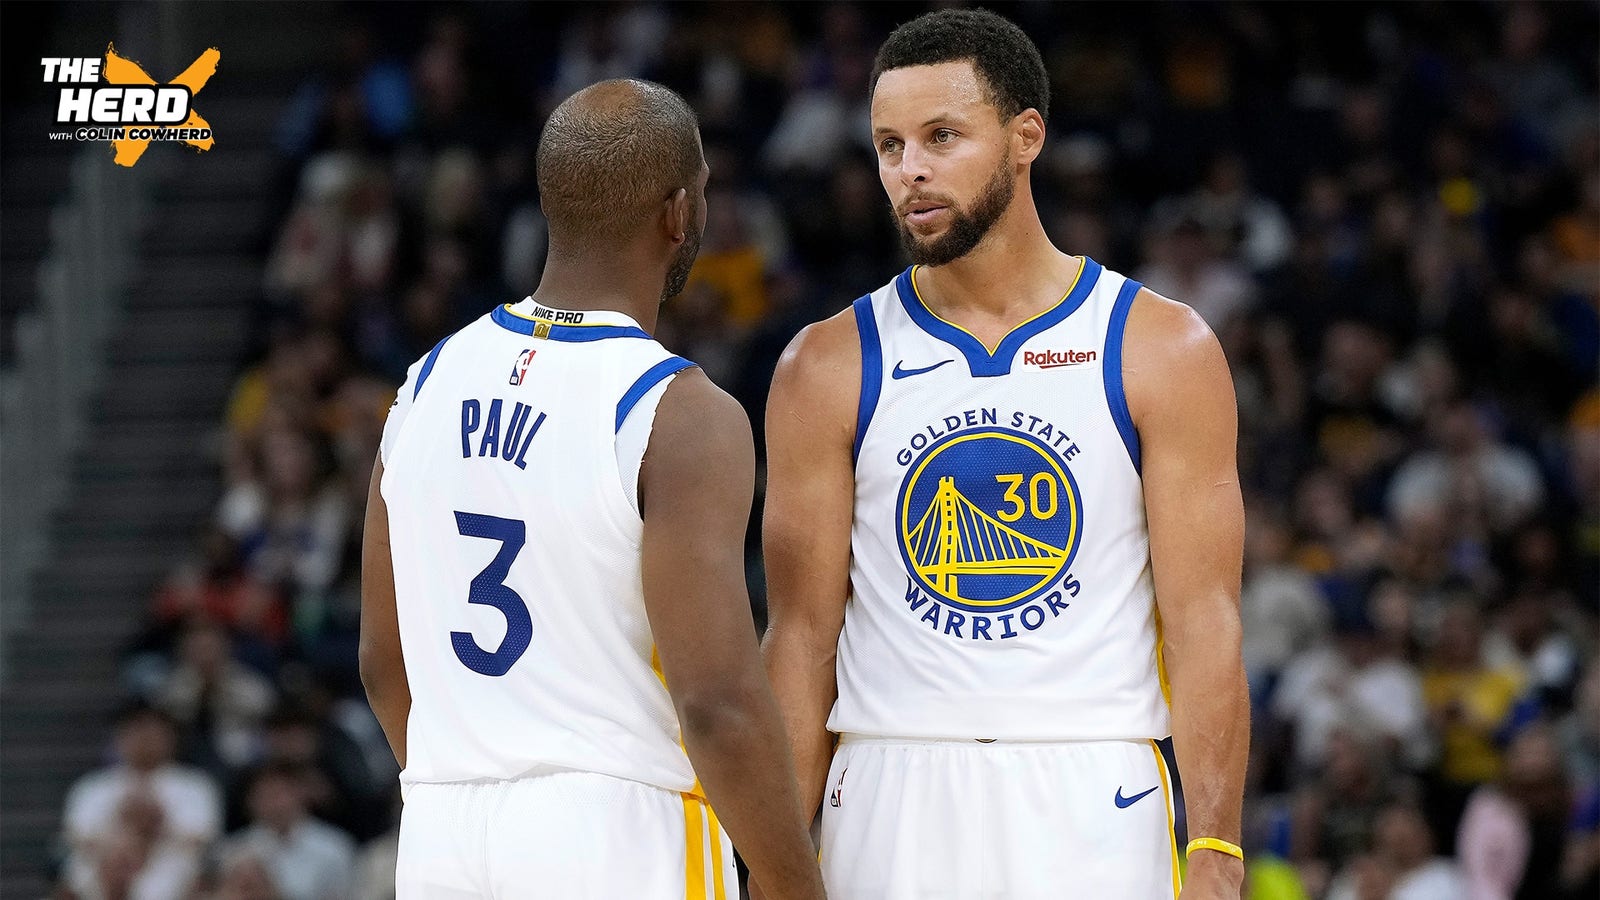 Chris Paul's expectations with Warriors